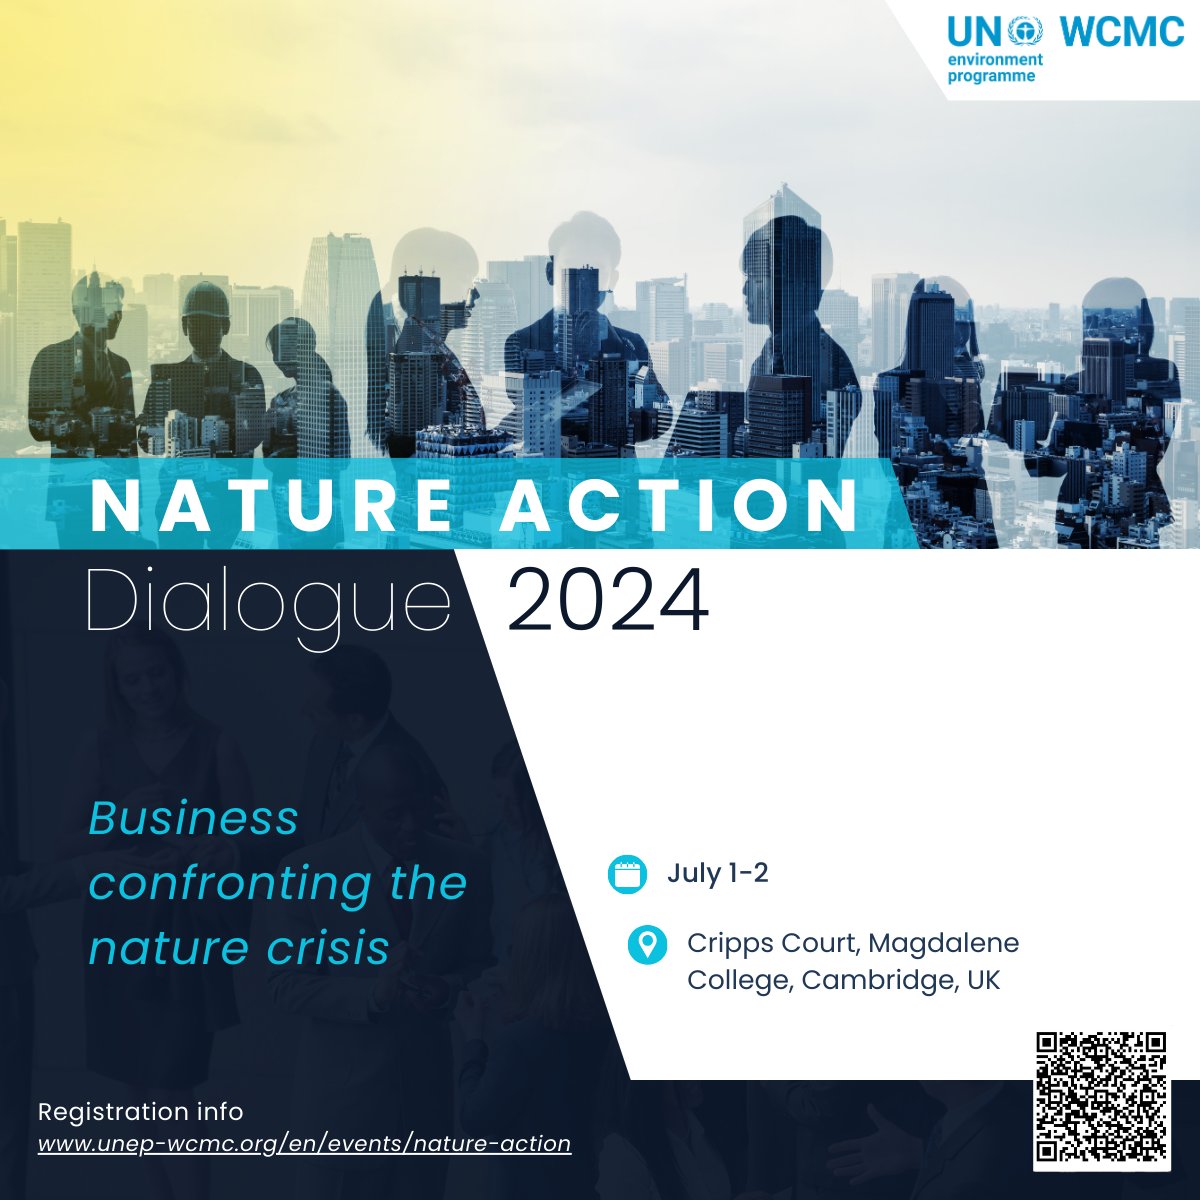 The private sector meets the conservation community in the lead-up to the @UNBiodiversity Conference #COP16. The Nature Action Dialogues will be held in Cambridge (UK) from 1 – 2 July 2024. Find out more & register: bit.ly/3P4Be0T